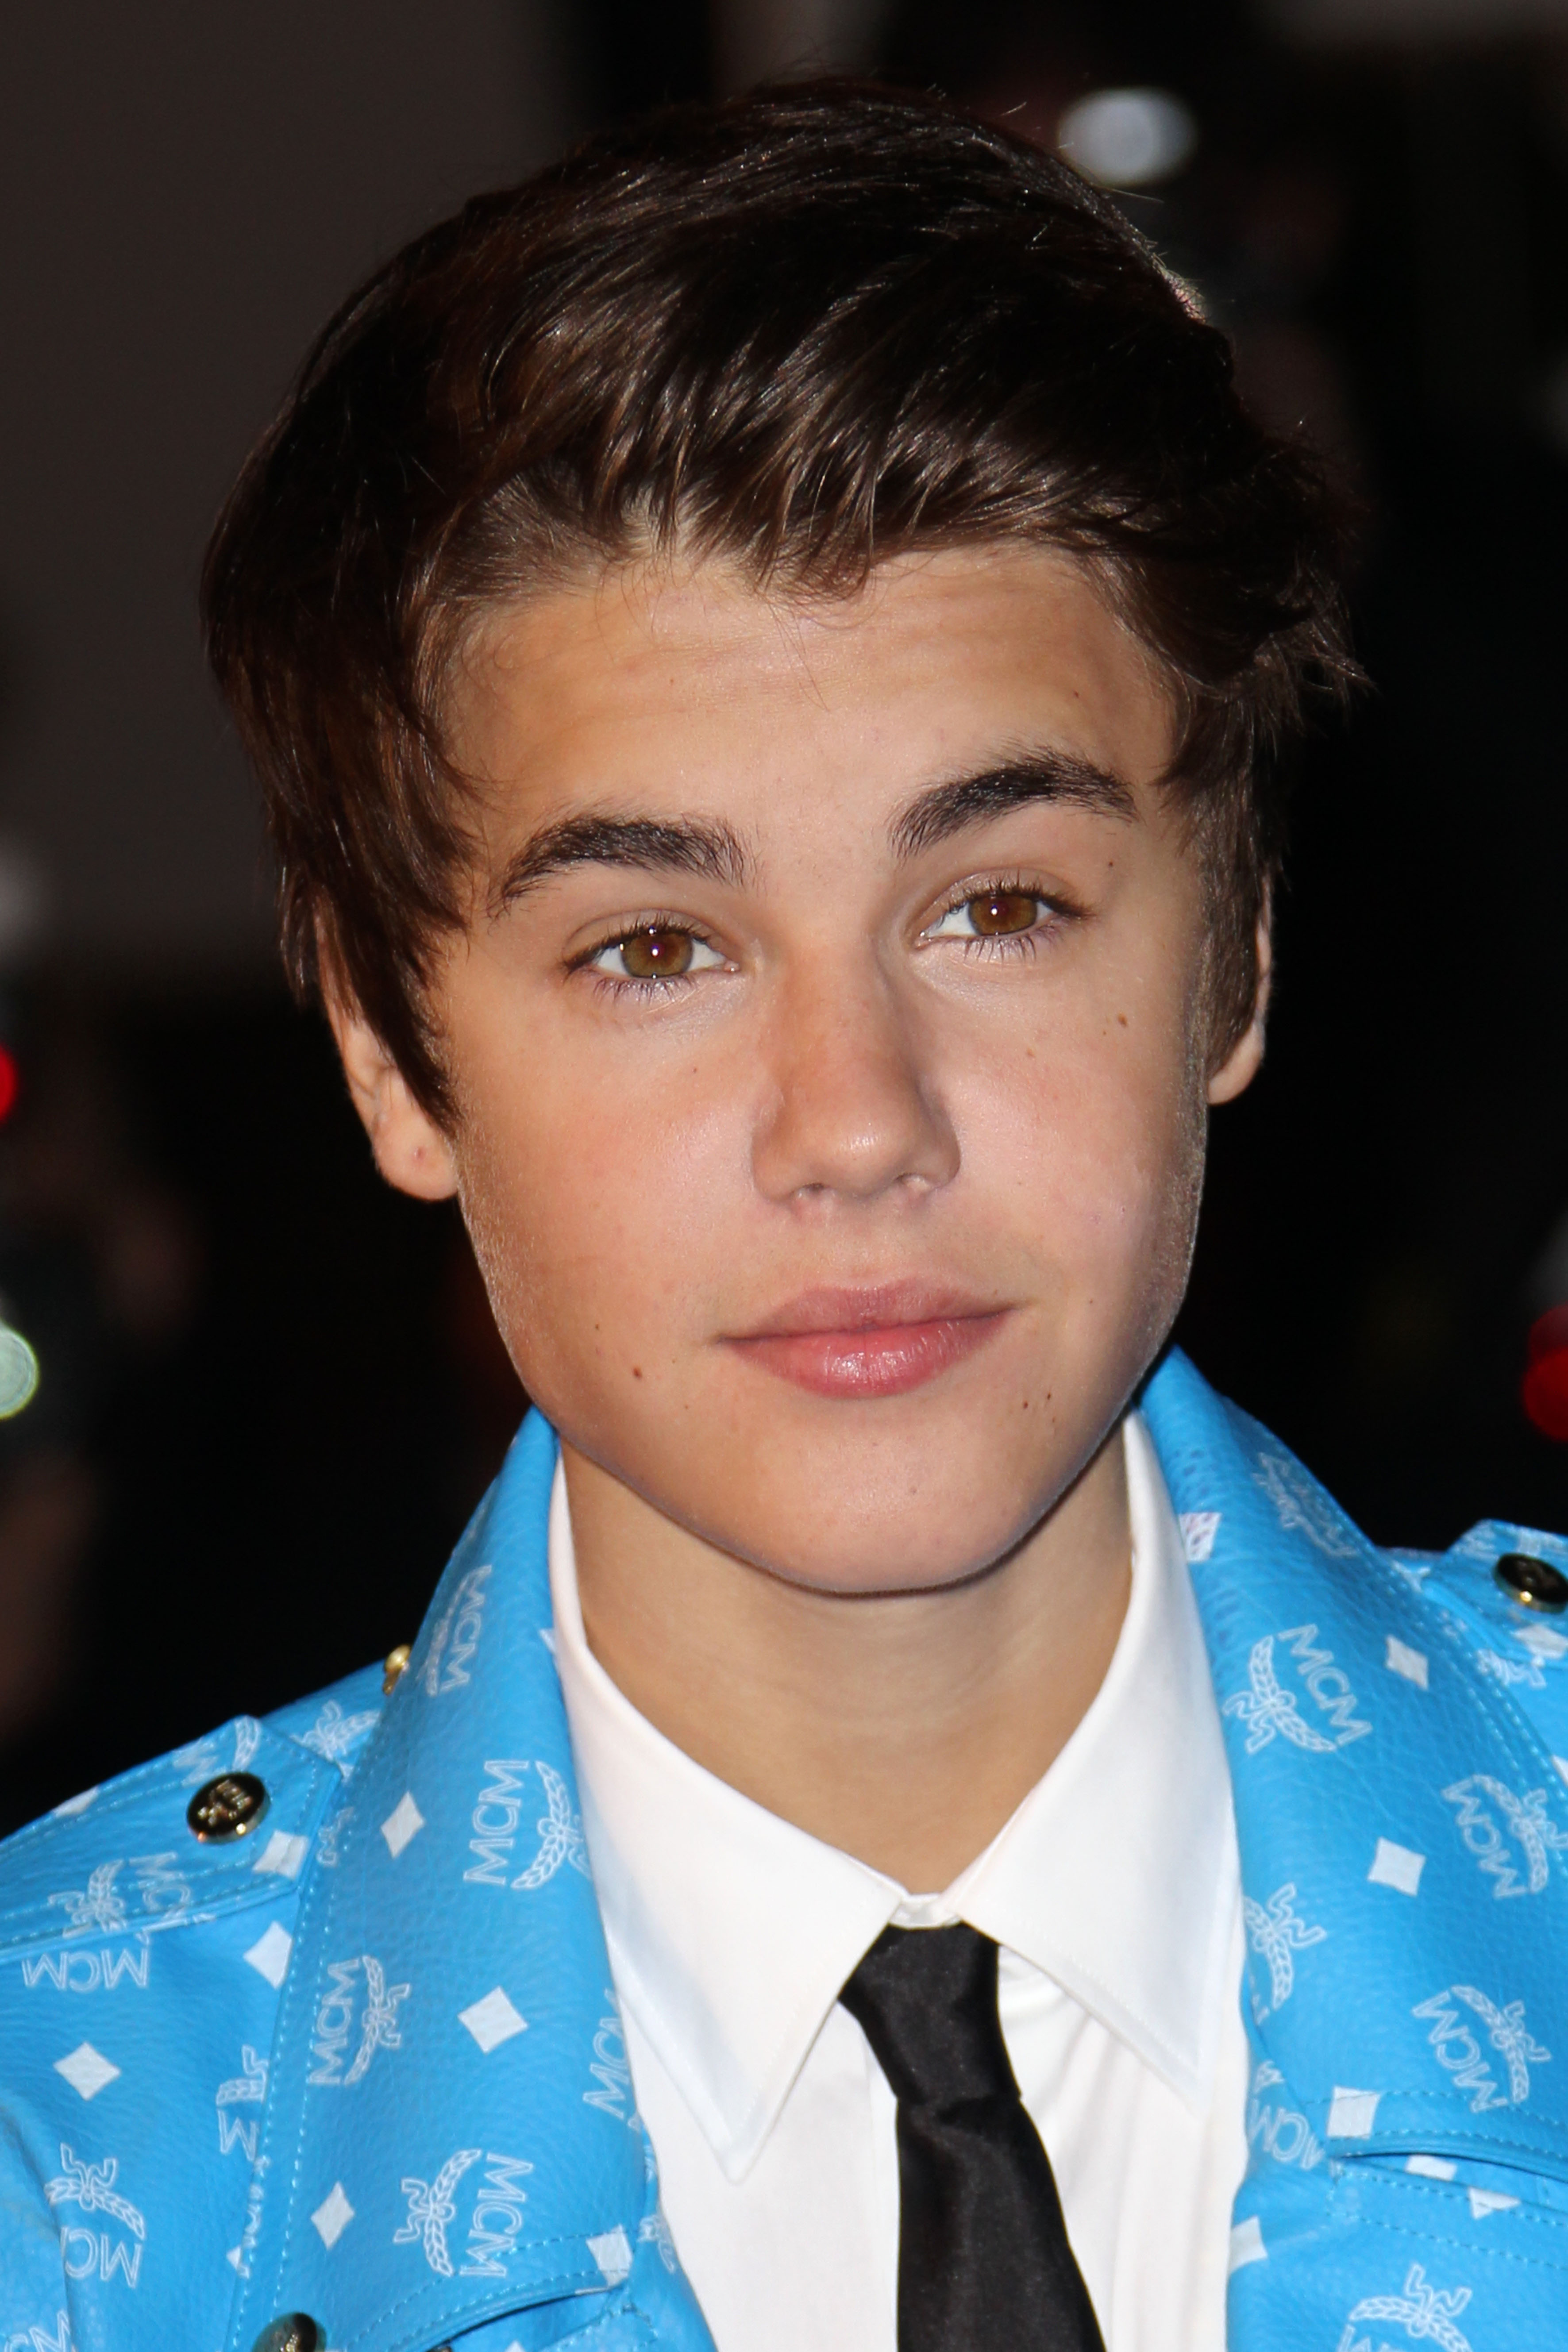 Justin Bieber at the NRJ Music Awards at Palais des Festivals in Cannes, France, on January 28, 2012 | Source: Getty Images